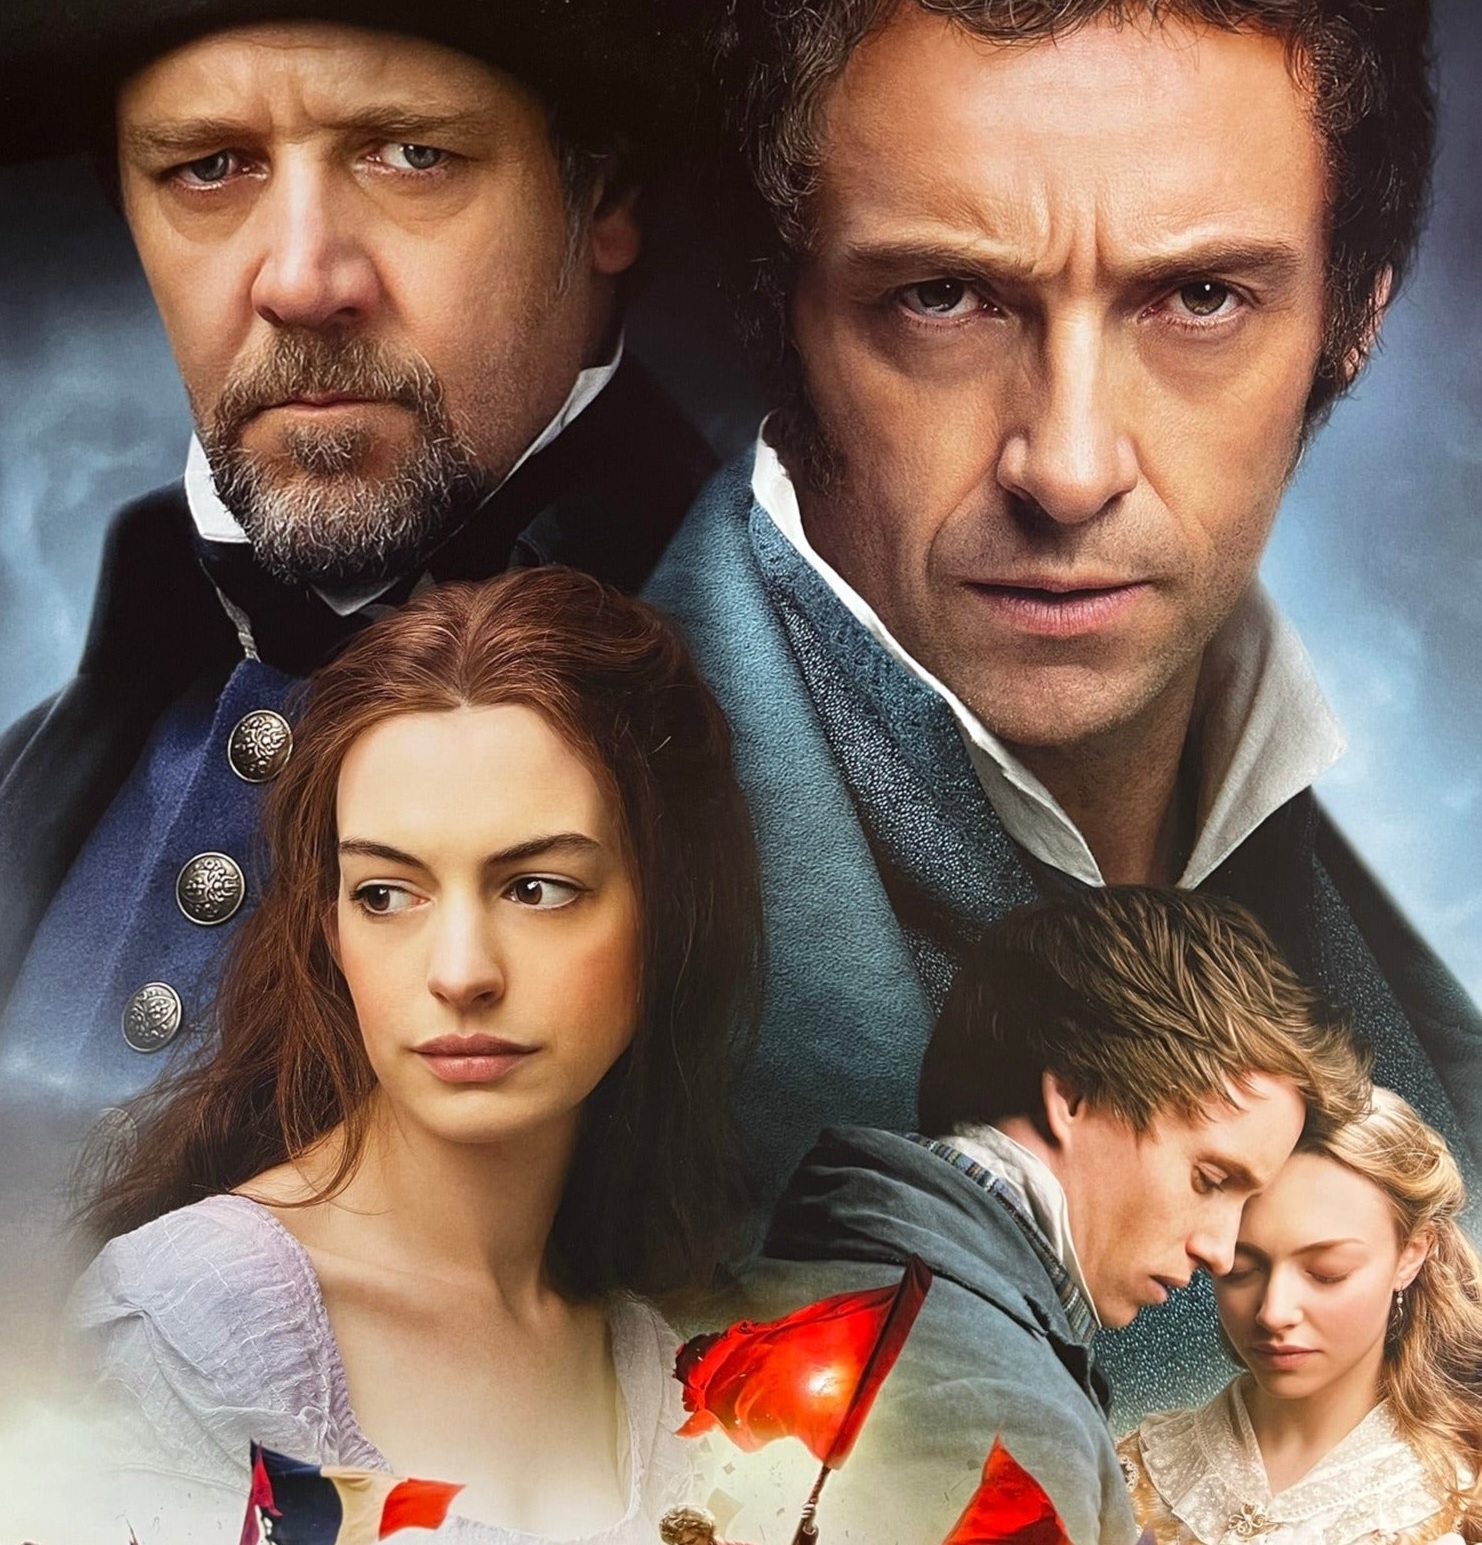 Treat mum to a special High Tea screening of Les Misérables: Remastered on Mother’s Day.